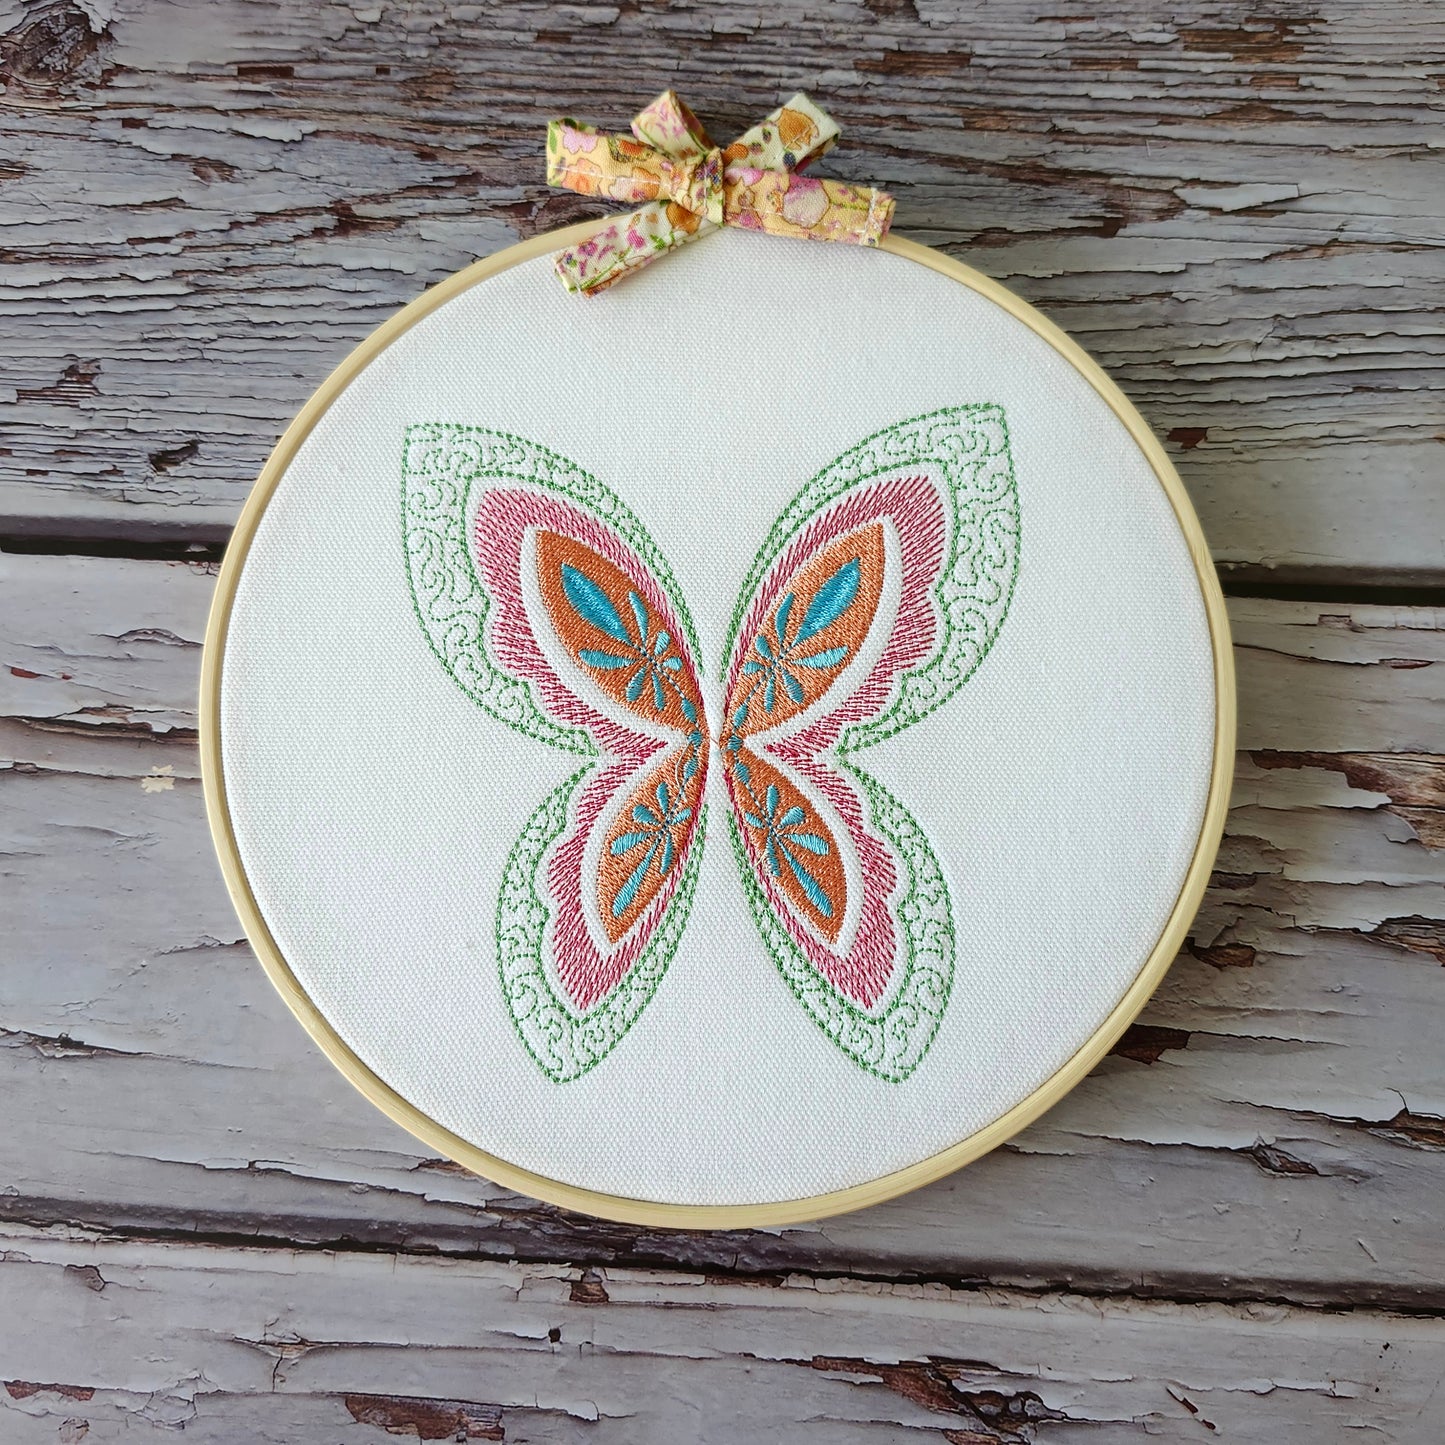 Hoop embroidered butterfly